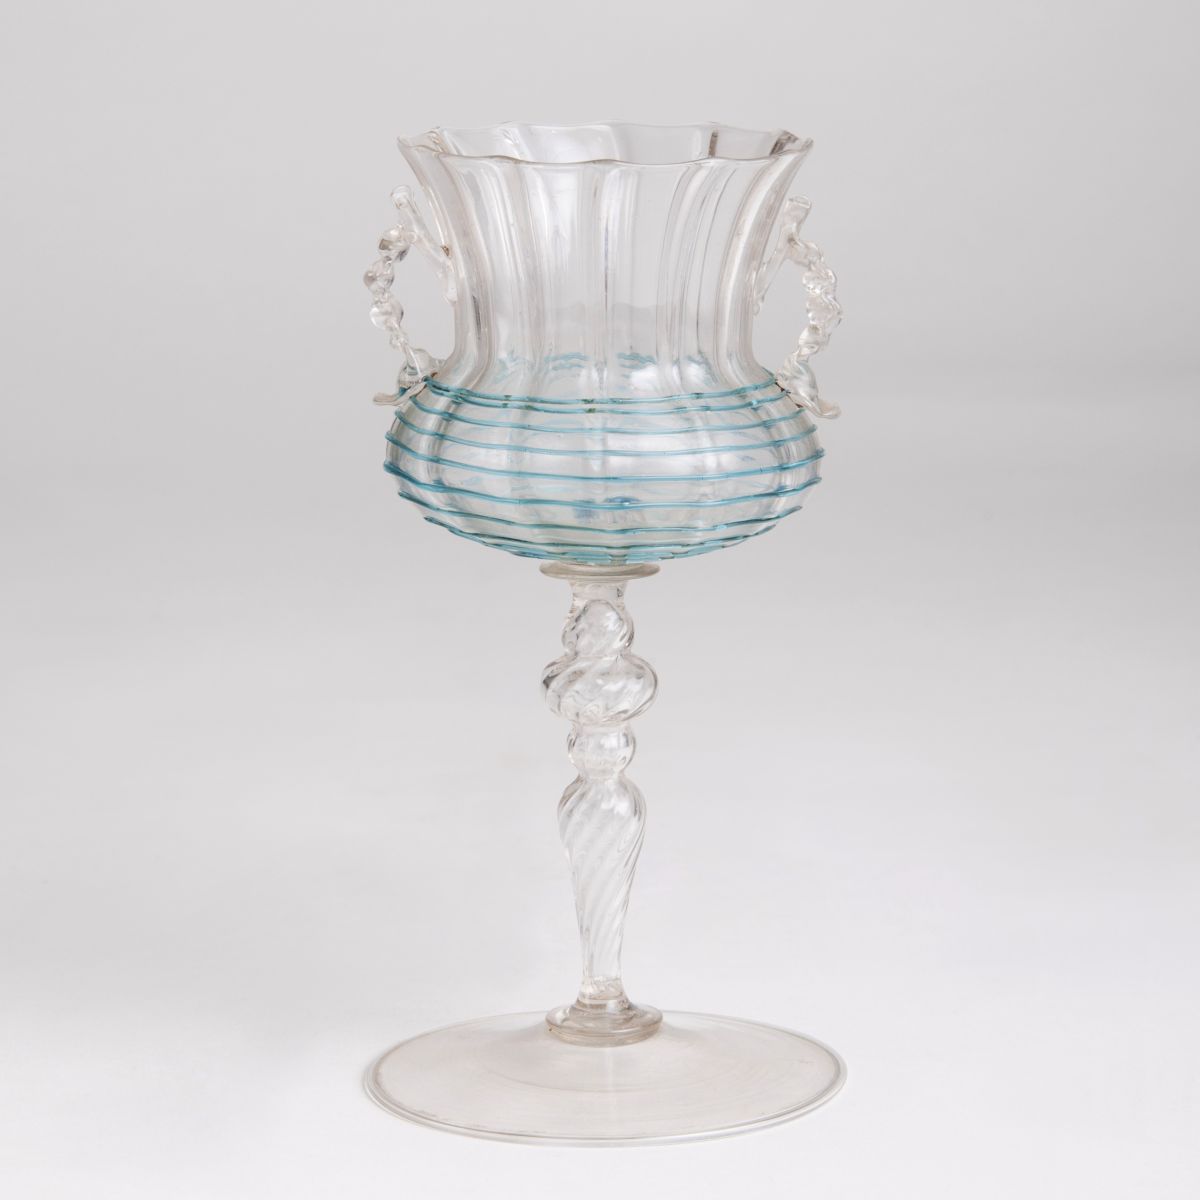 A Wine Glass with applied threads